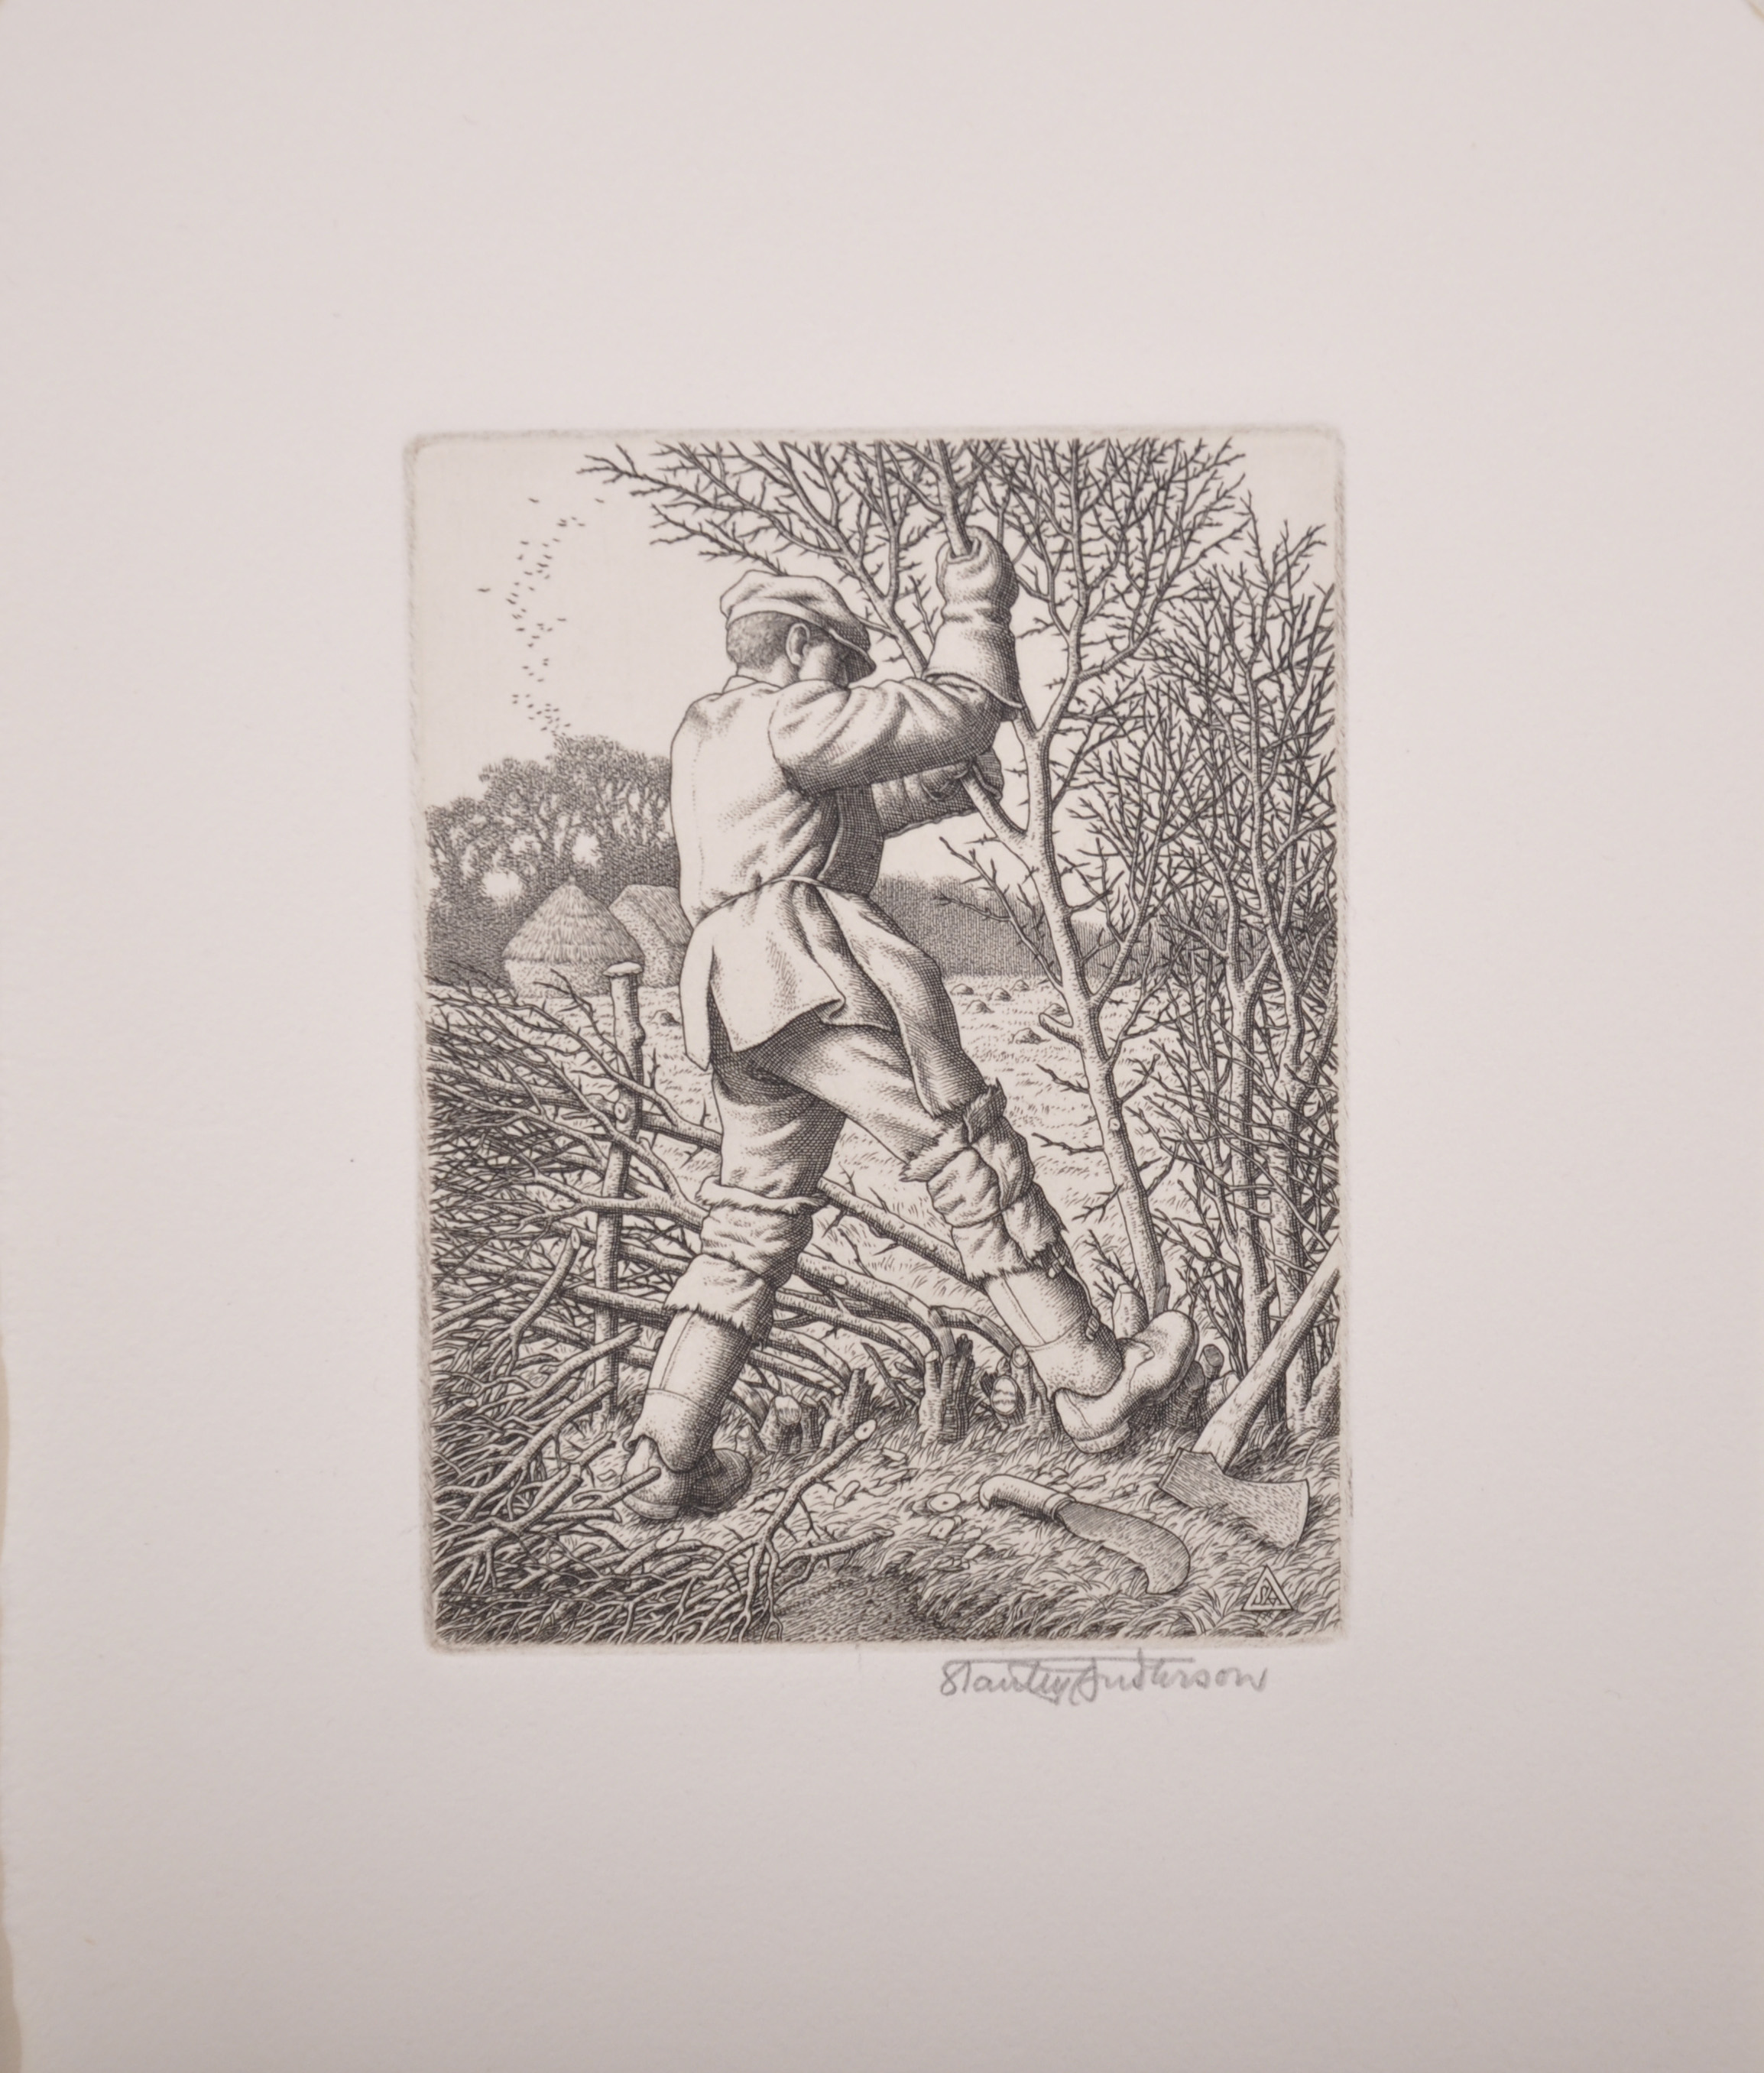 Stanley Anderson (1884-1966) British. “Hedge-laying”, Etching, Signed in Pencil, Mounted, - Image 2 of 4